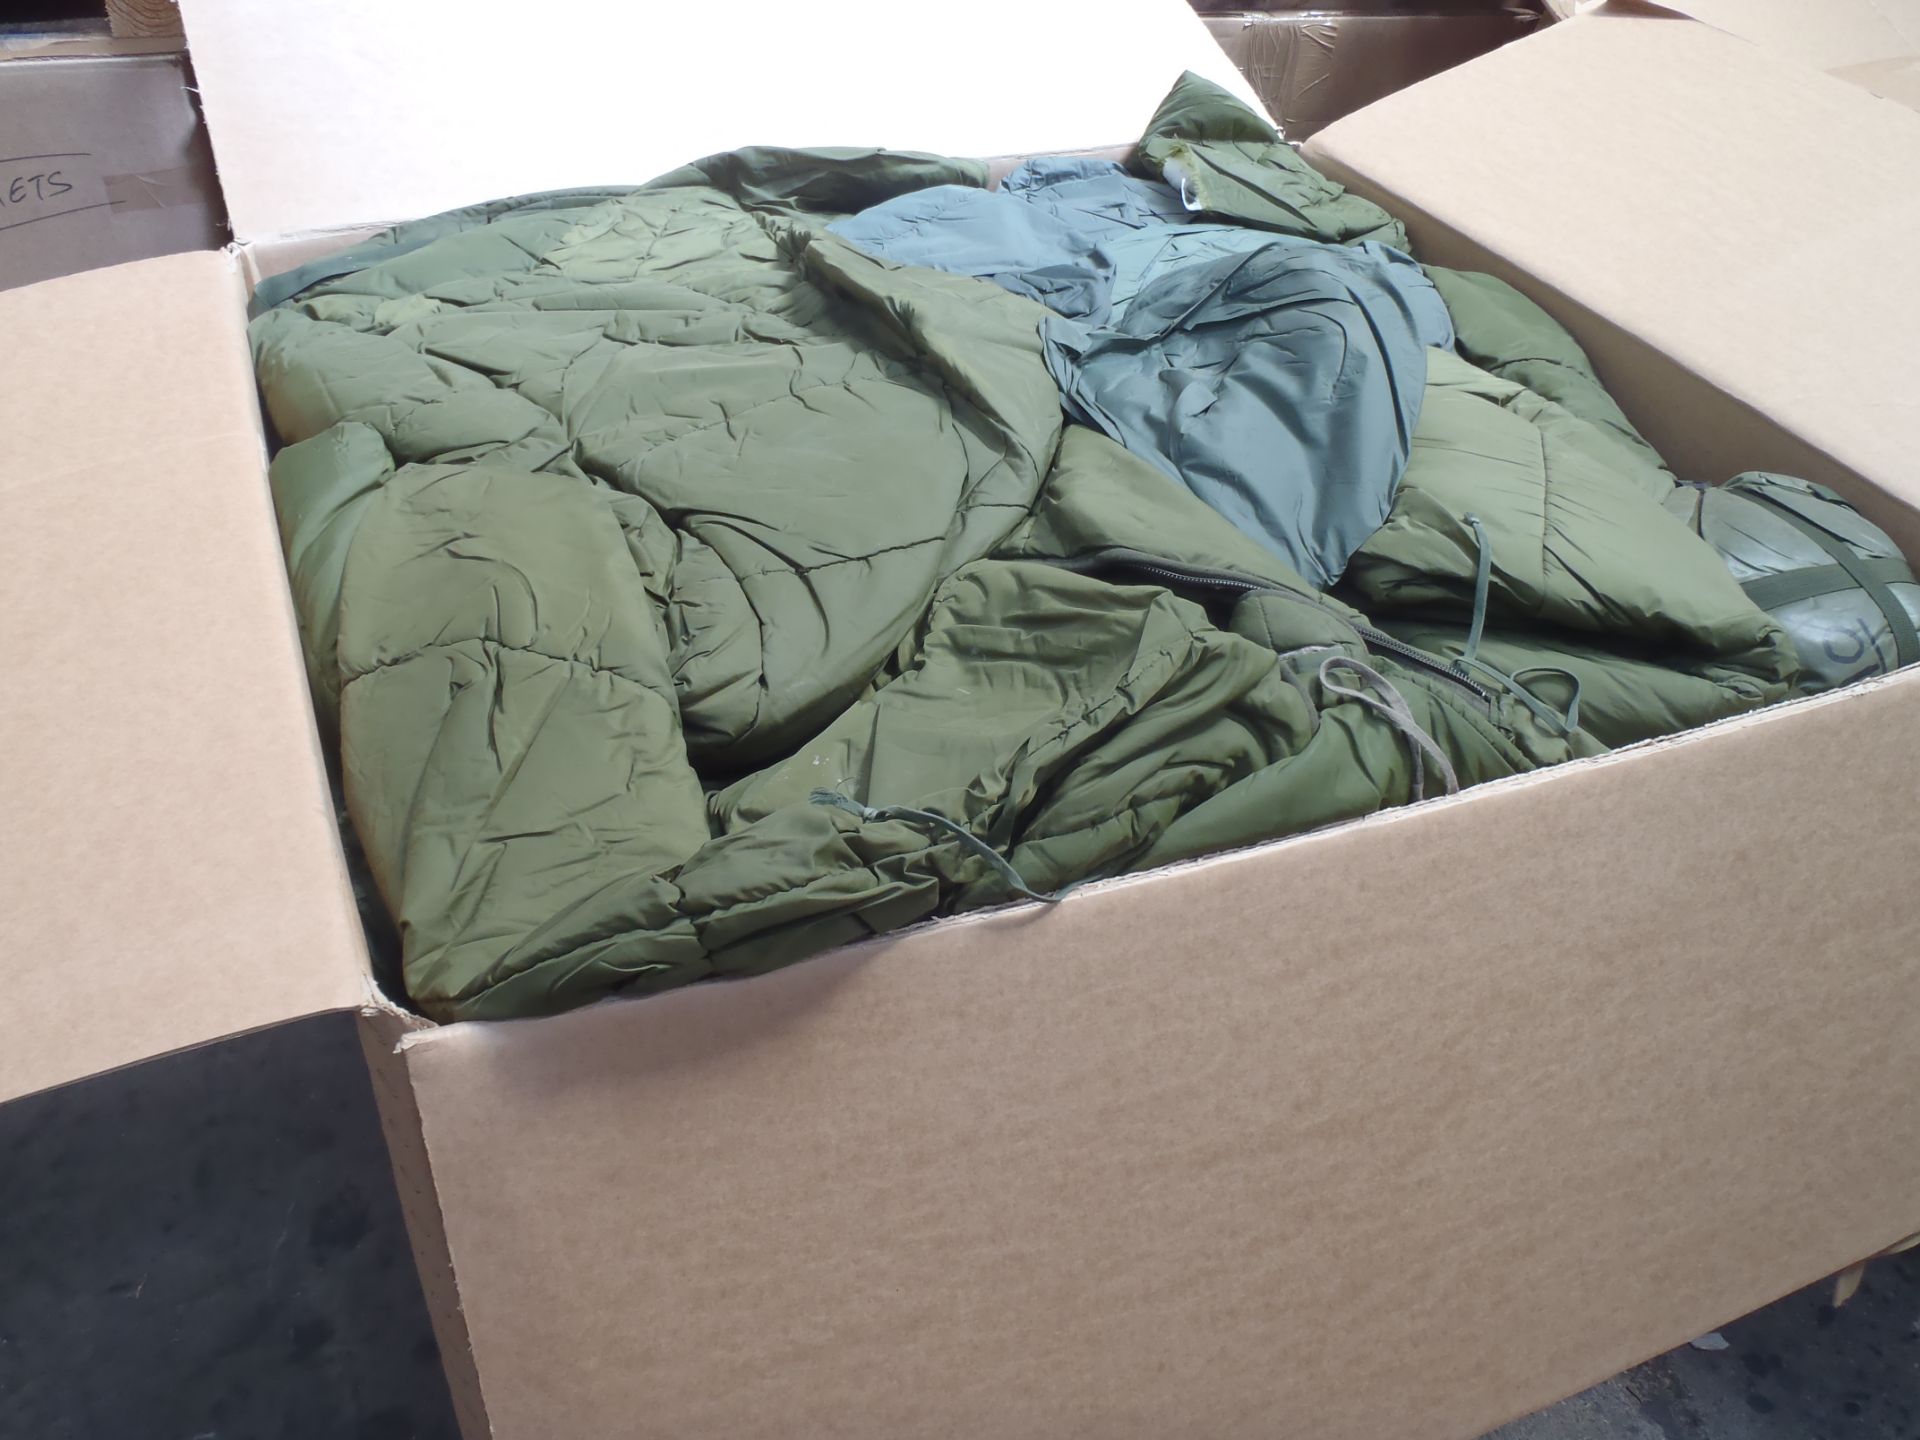 PALLET OF SLEEPING BAGS - USED CONDITION - UNGRADED